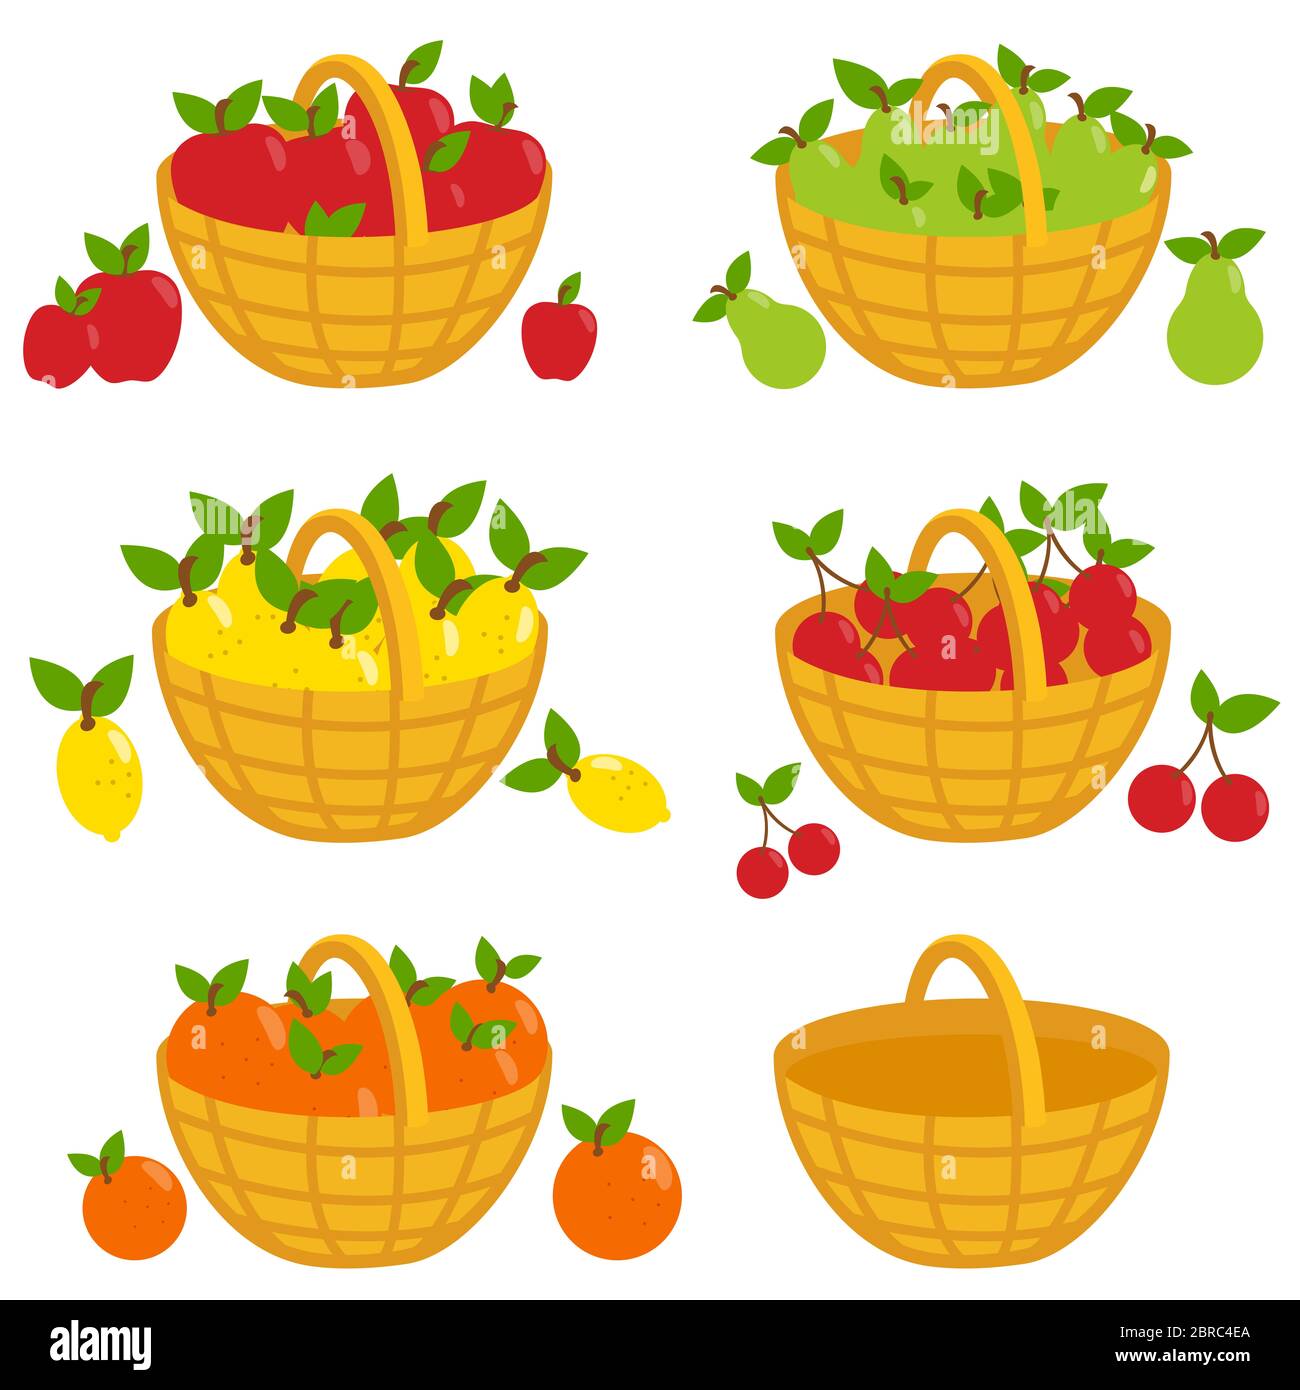 Set of fruits in baskets. Apples, pears, lemons, cherries, oranges and an empty basket. Stock Photo